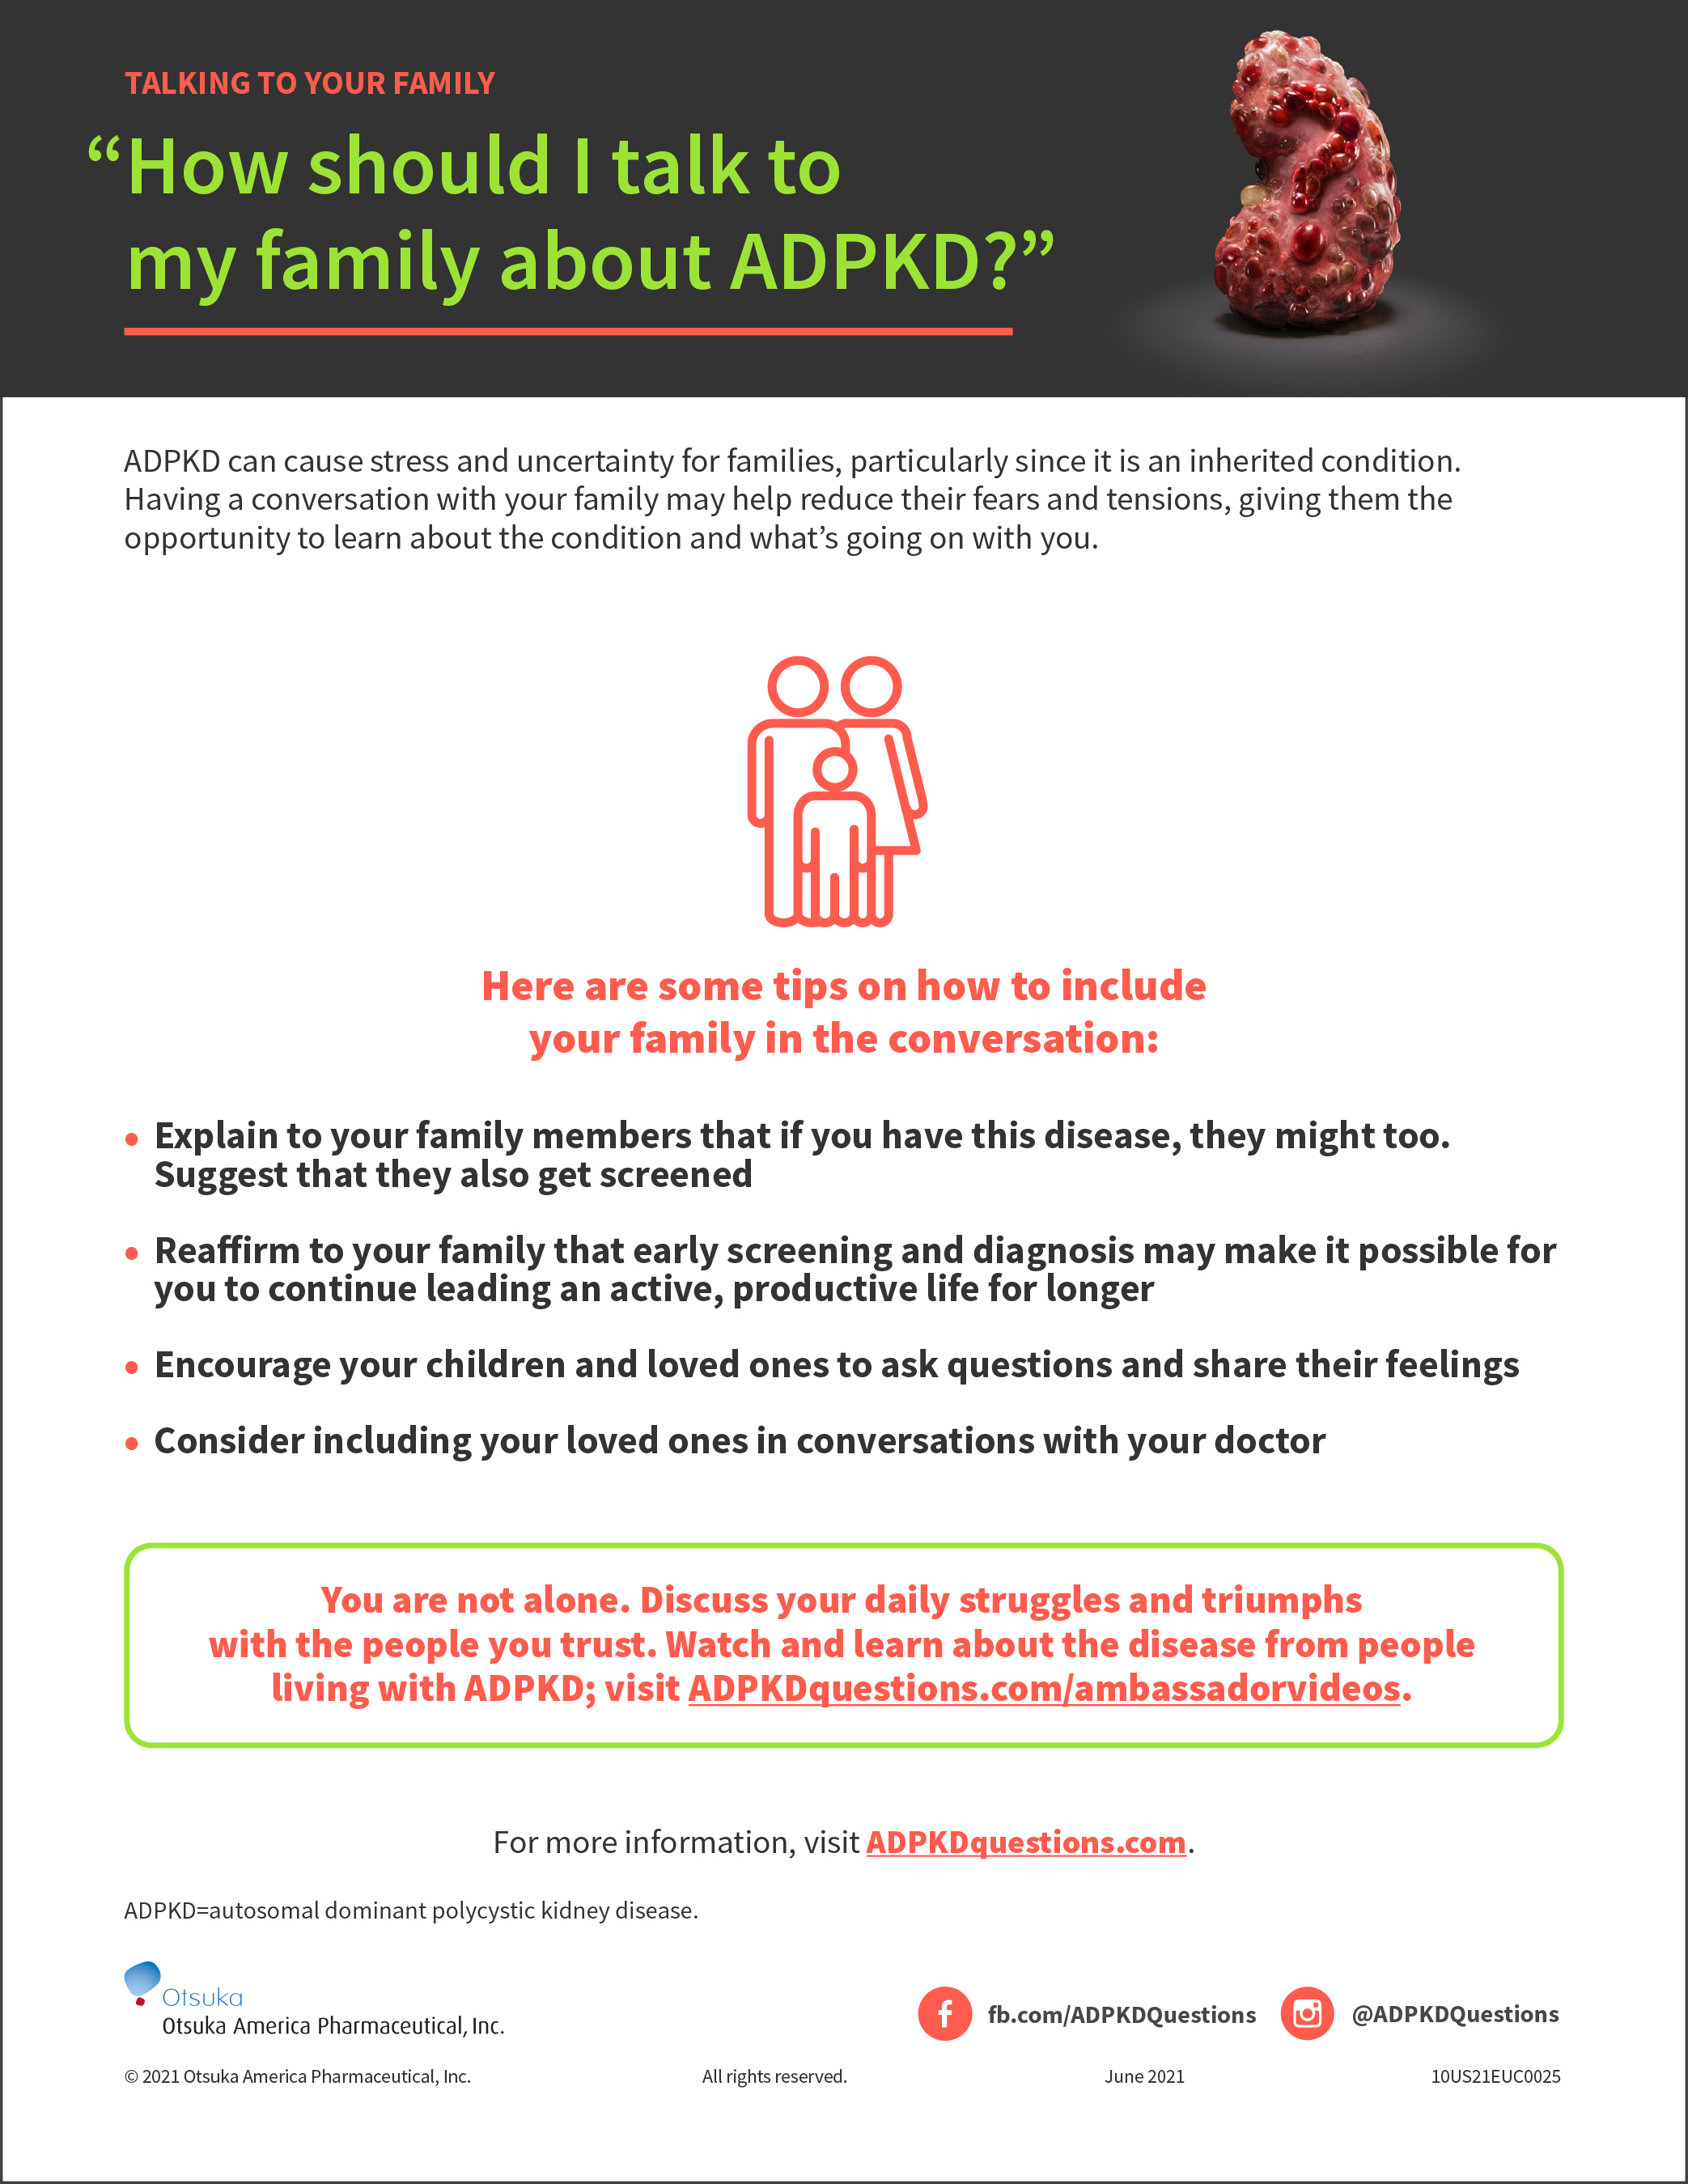 “How should I talk to my family about ADPKD?”